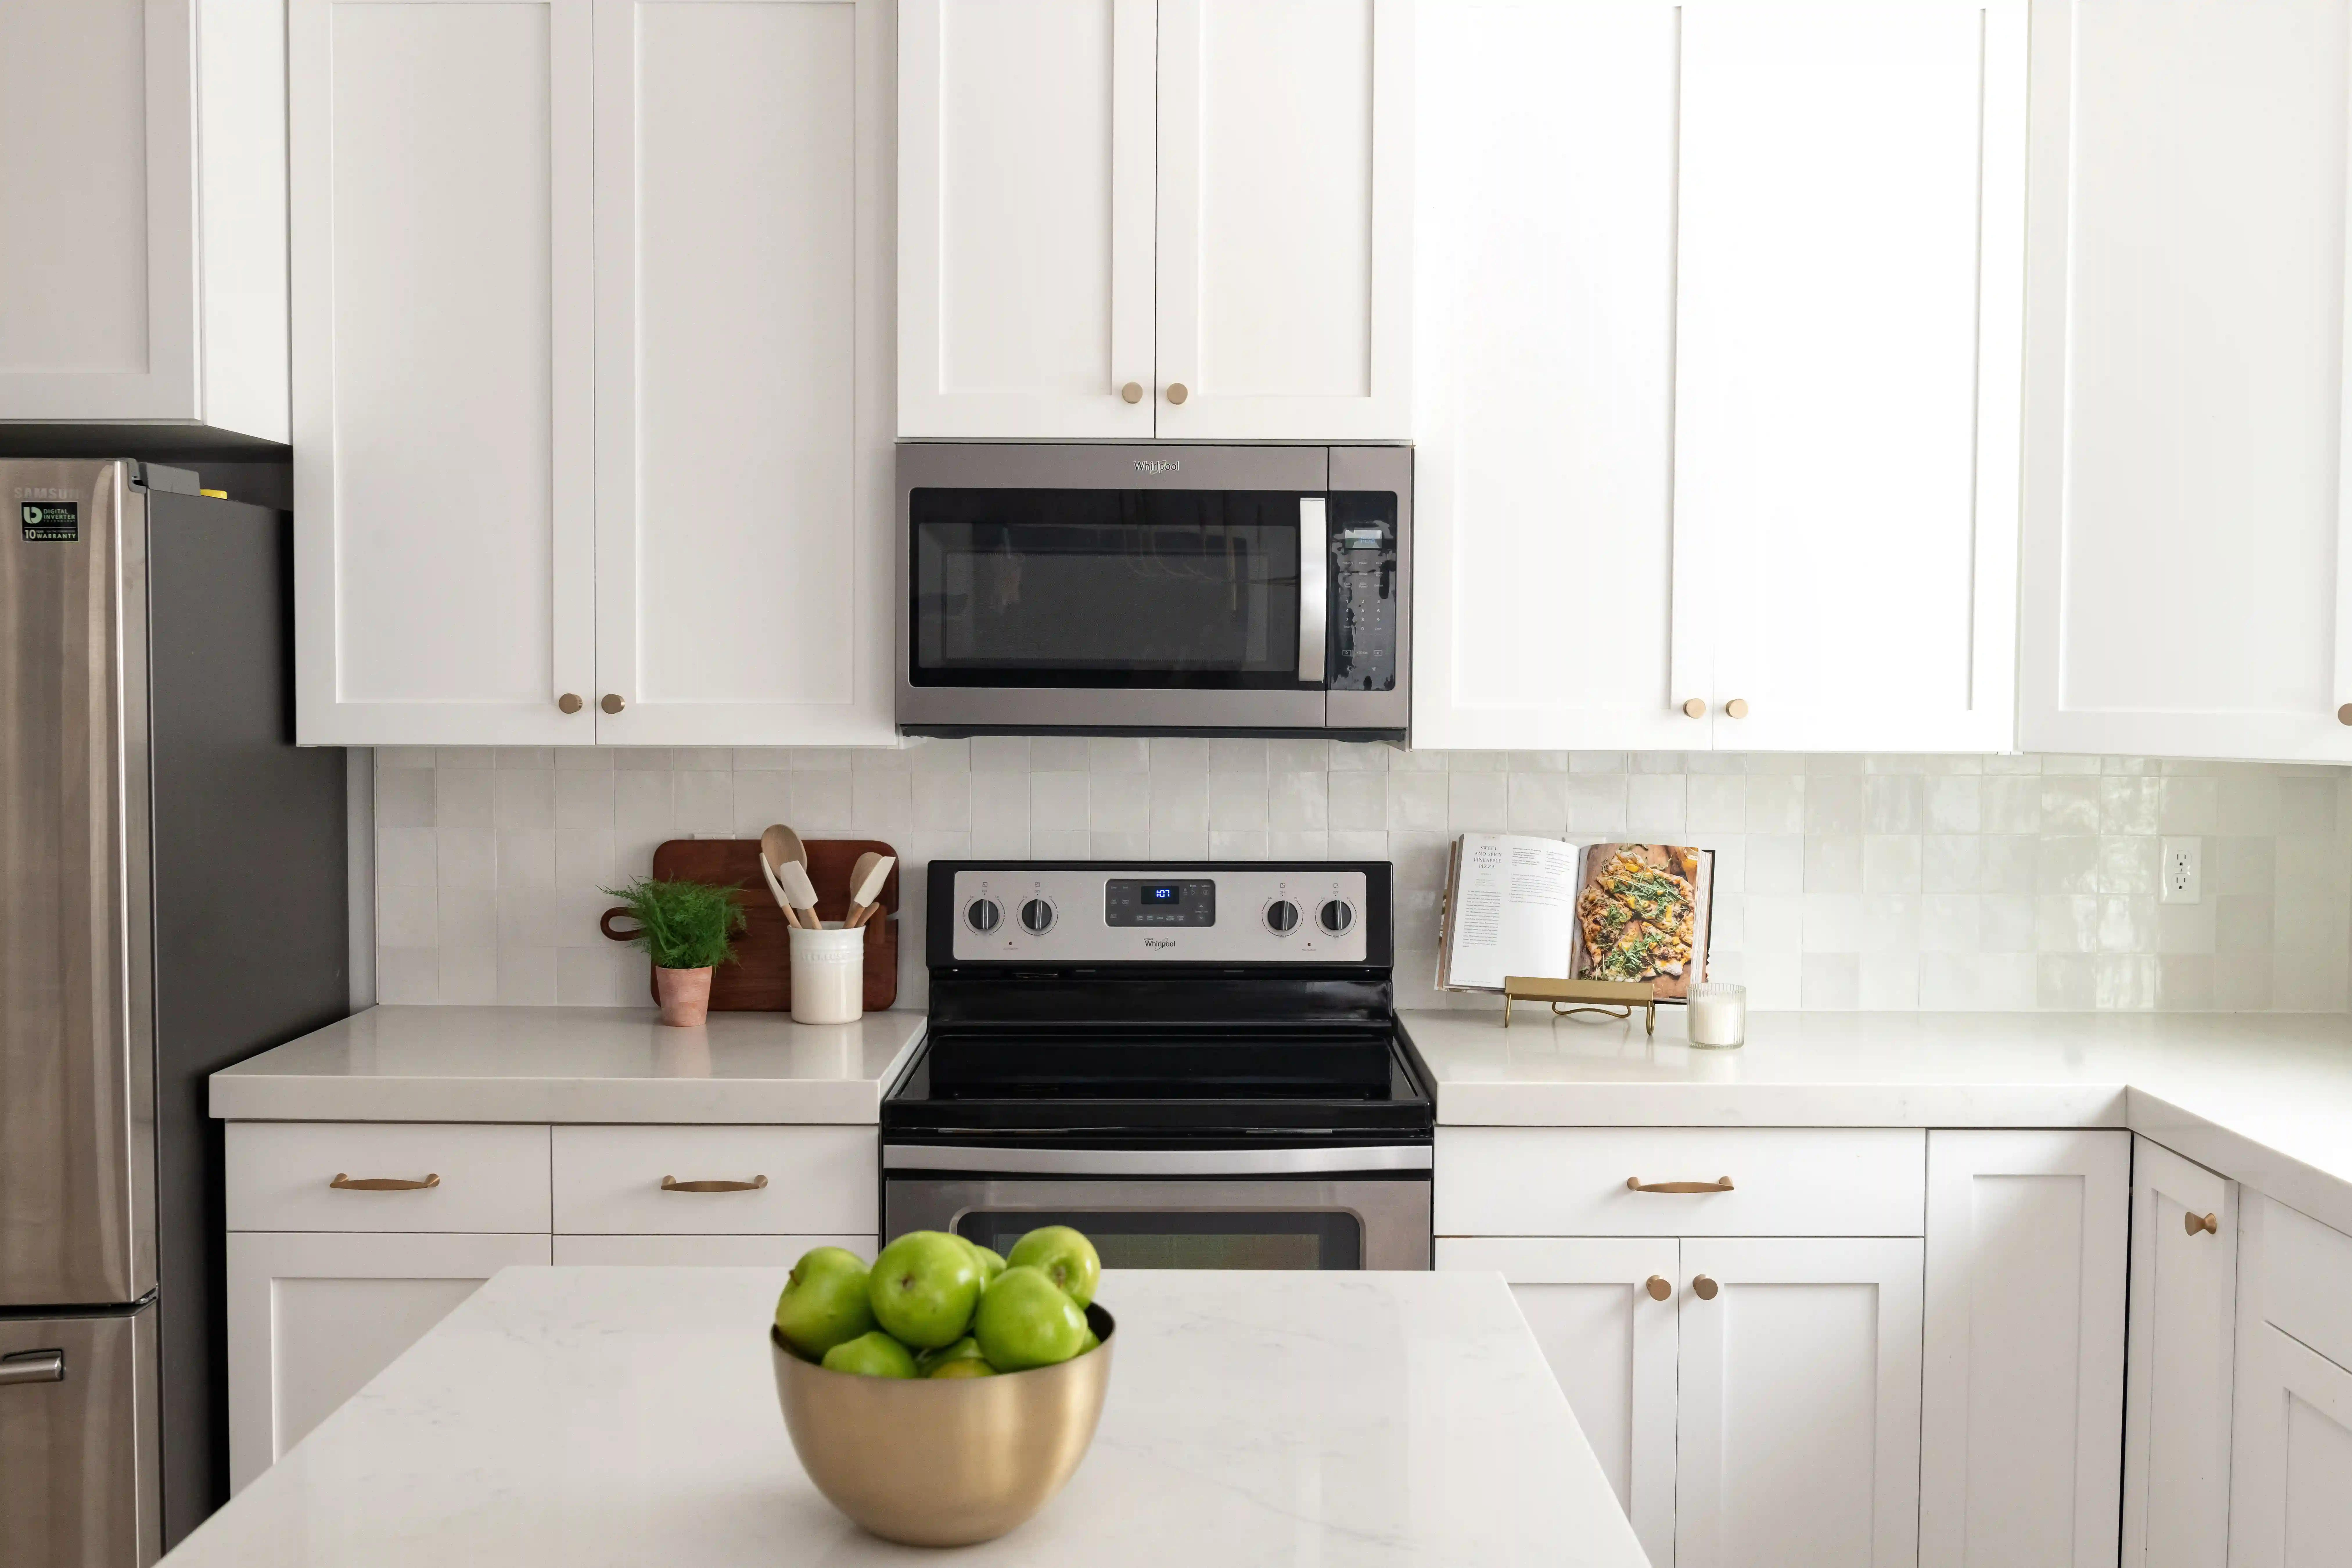 A kitchen with a creamy textured white backsplash between white upper and lower cabinets with brass handles. White countertops contrast with the stainless steel oven and microwave in the center of the wall. 